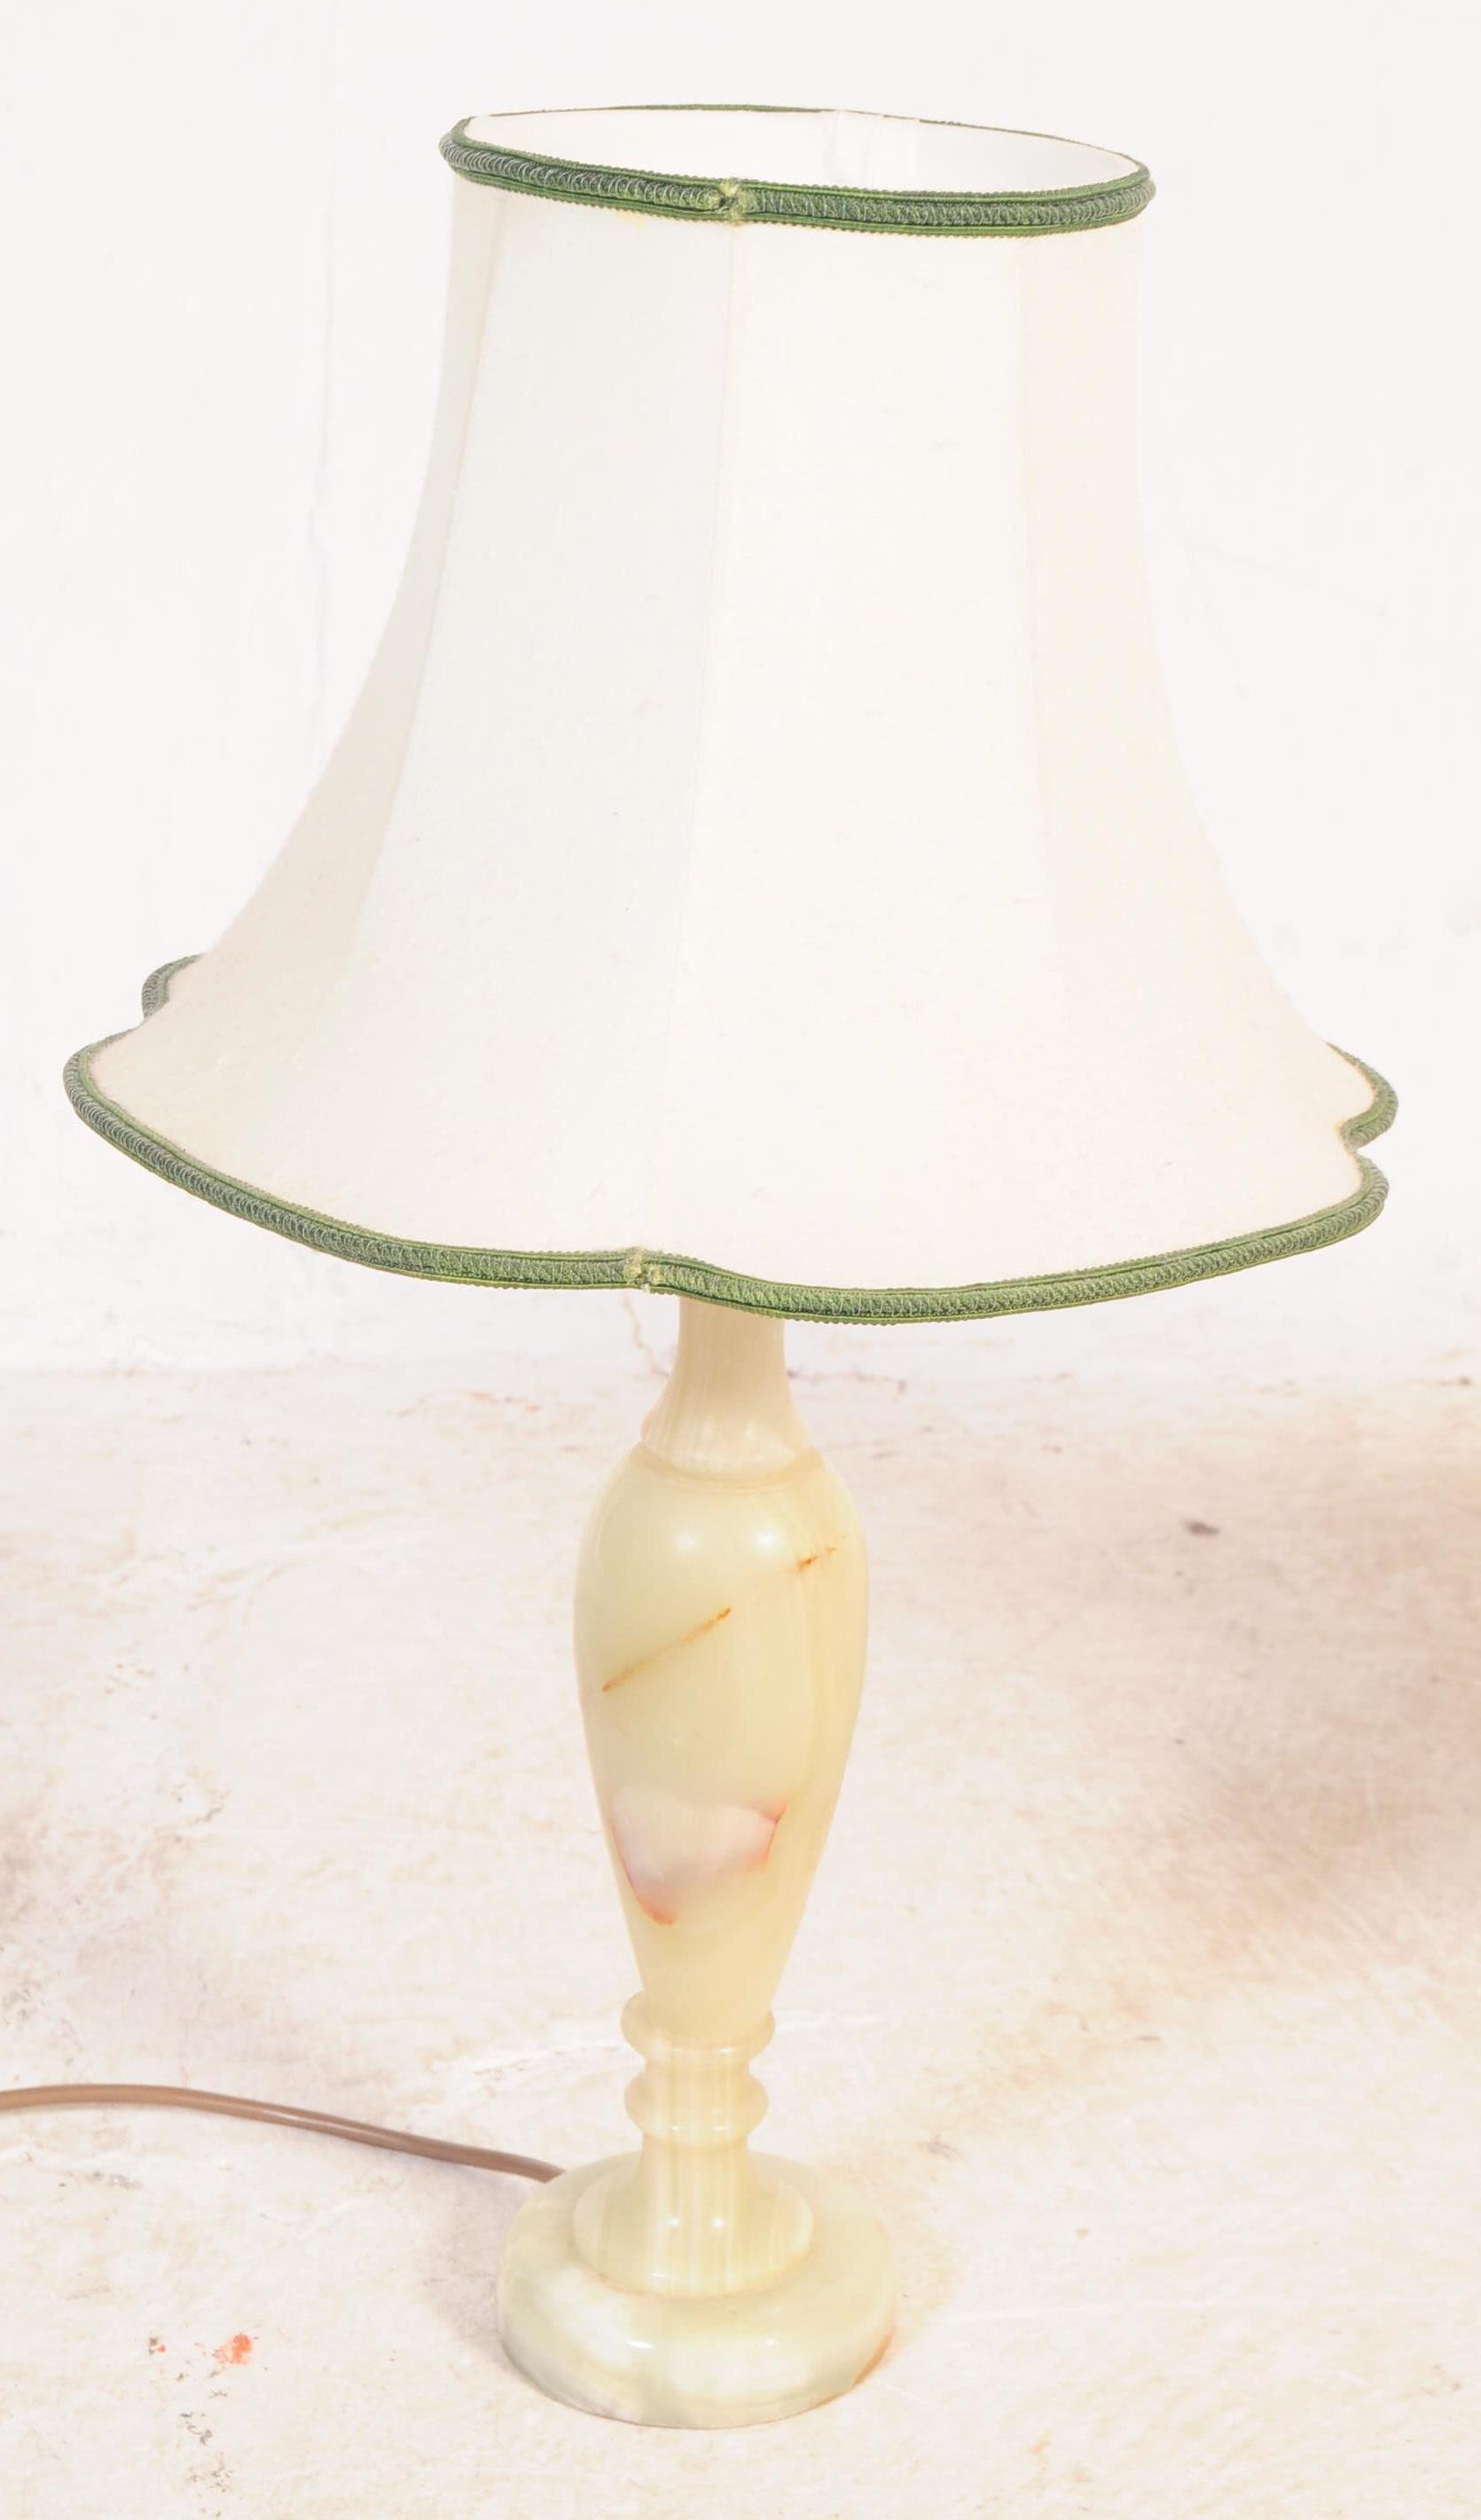 SET OF FOUR MID 20TH CENTURY ONYX TABLE LAMPS - Image 2 of 4